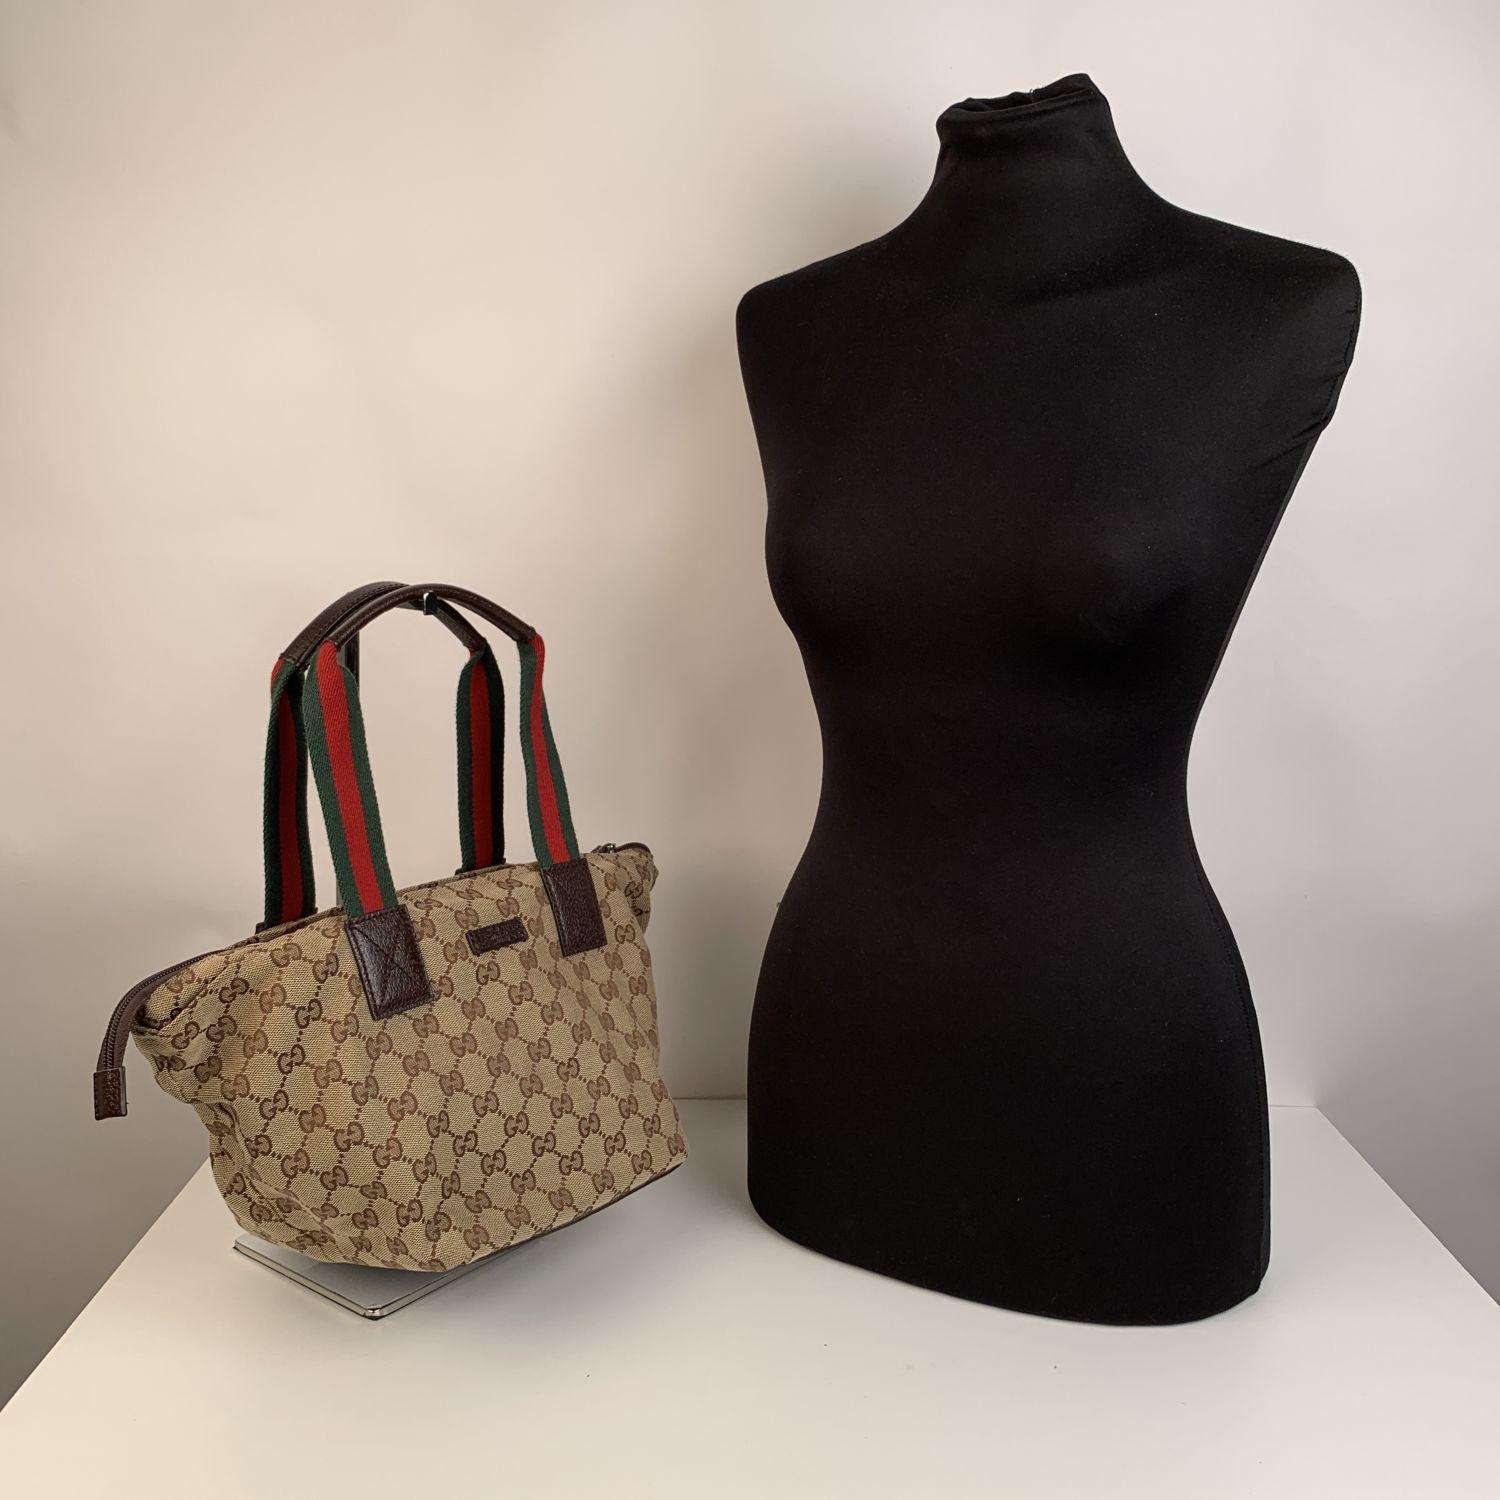 We offer Certificate of Authenticity provided by Entrupy for this item at no further cost.

Beautiful Gucci monogram small tote bag, crafted in beige GG - GUCCI monogram canvas with dark brown leather trim and Green/Red/Green canvas handles. Upper